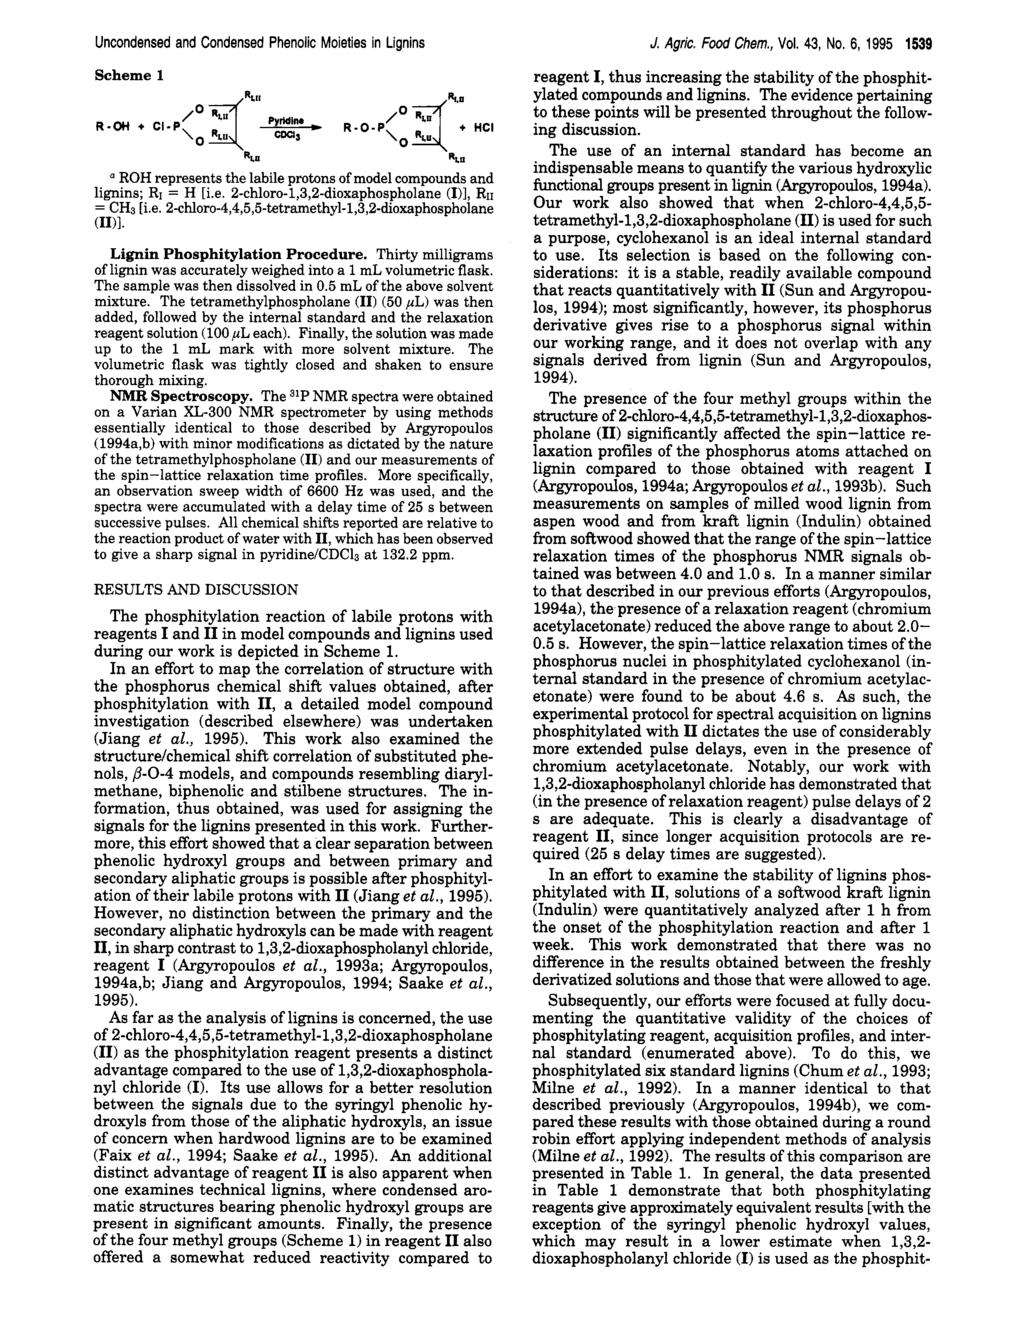 Uncondensed and Condensed Phenolic Moieties in Lignins J. Agric. Food Chem., Vol. 43, No. 6, 1995 1539 Scheme 1 a ROH represents the labile protons of model compounds and lignins; RI = H [i.e. 2-chloro-1,3,2-dioxaphospholane (I)], RII = CH3 [i.